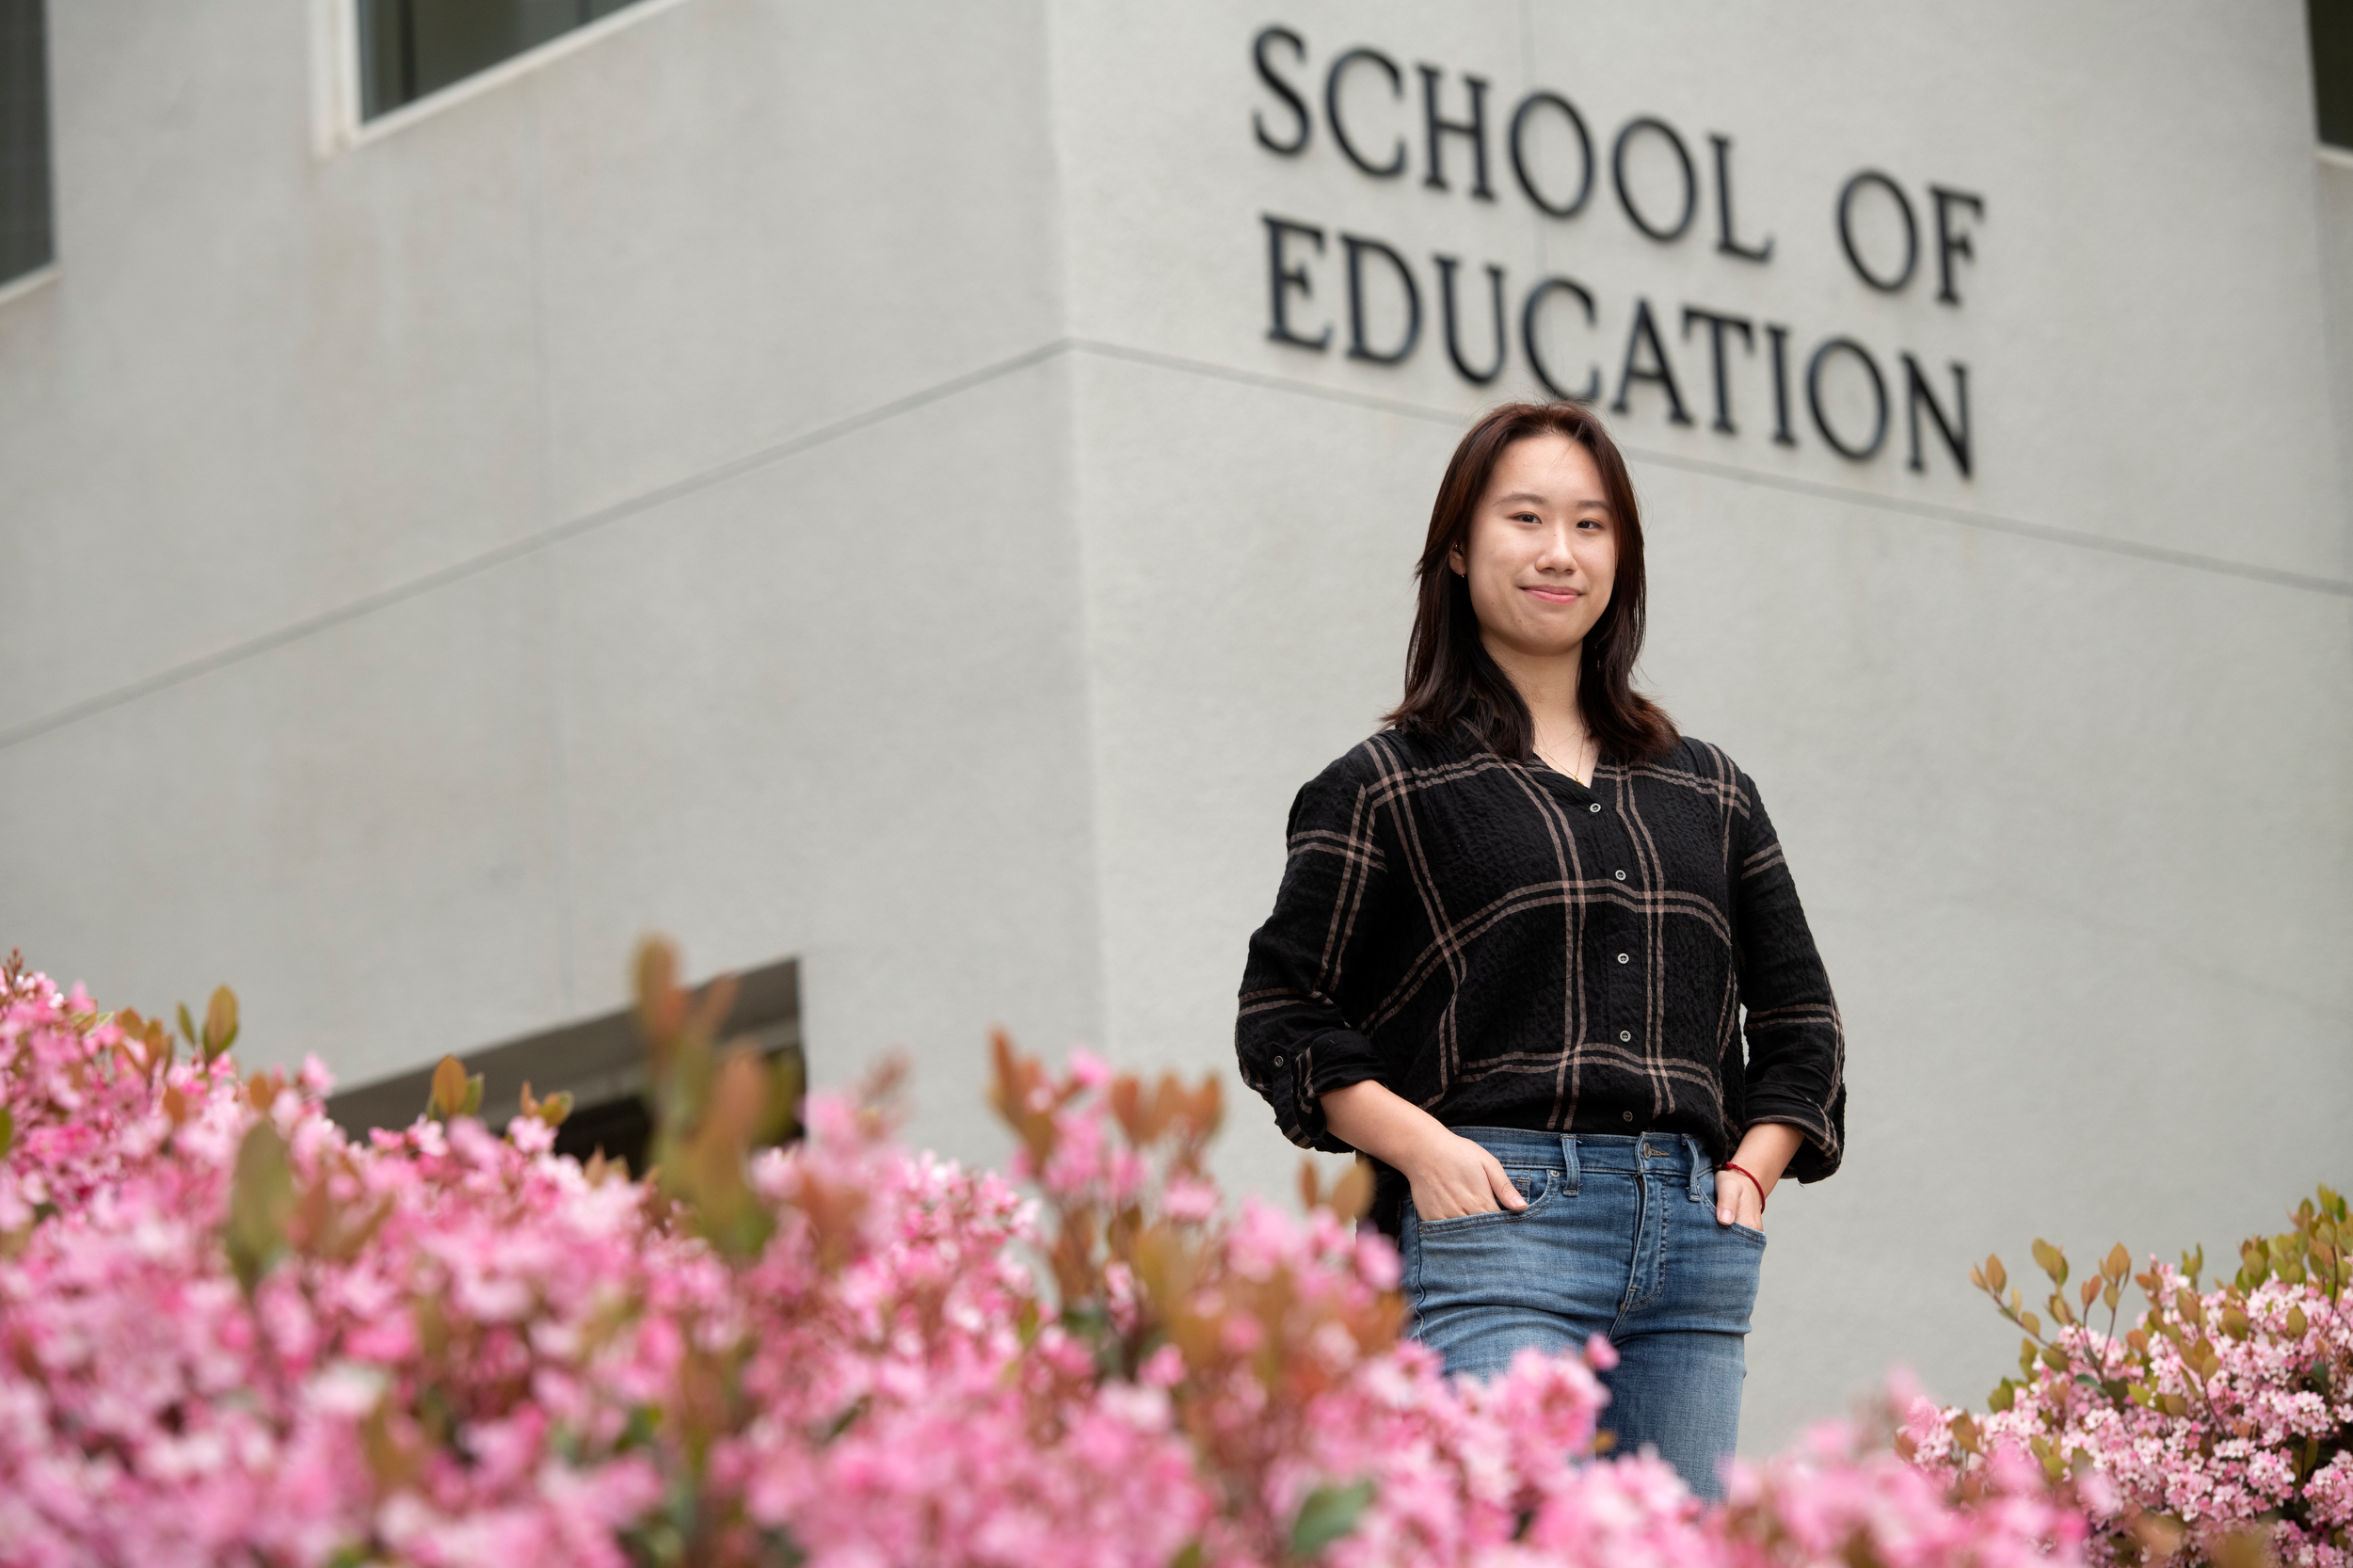 Jessica Cai in front of the School of Education